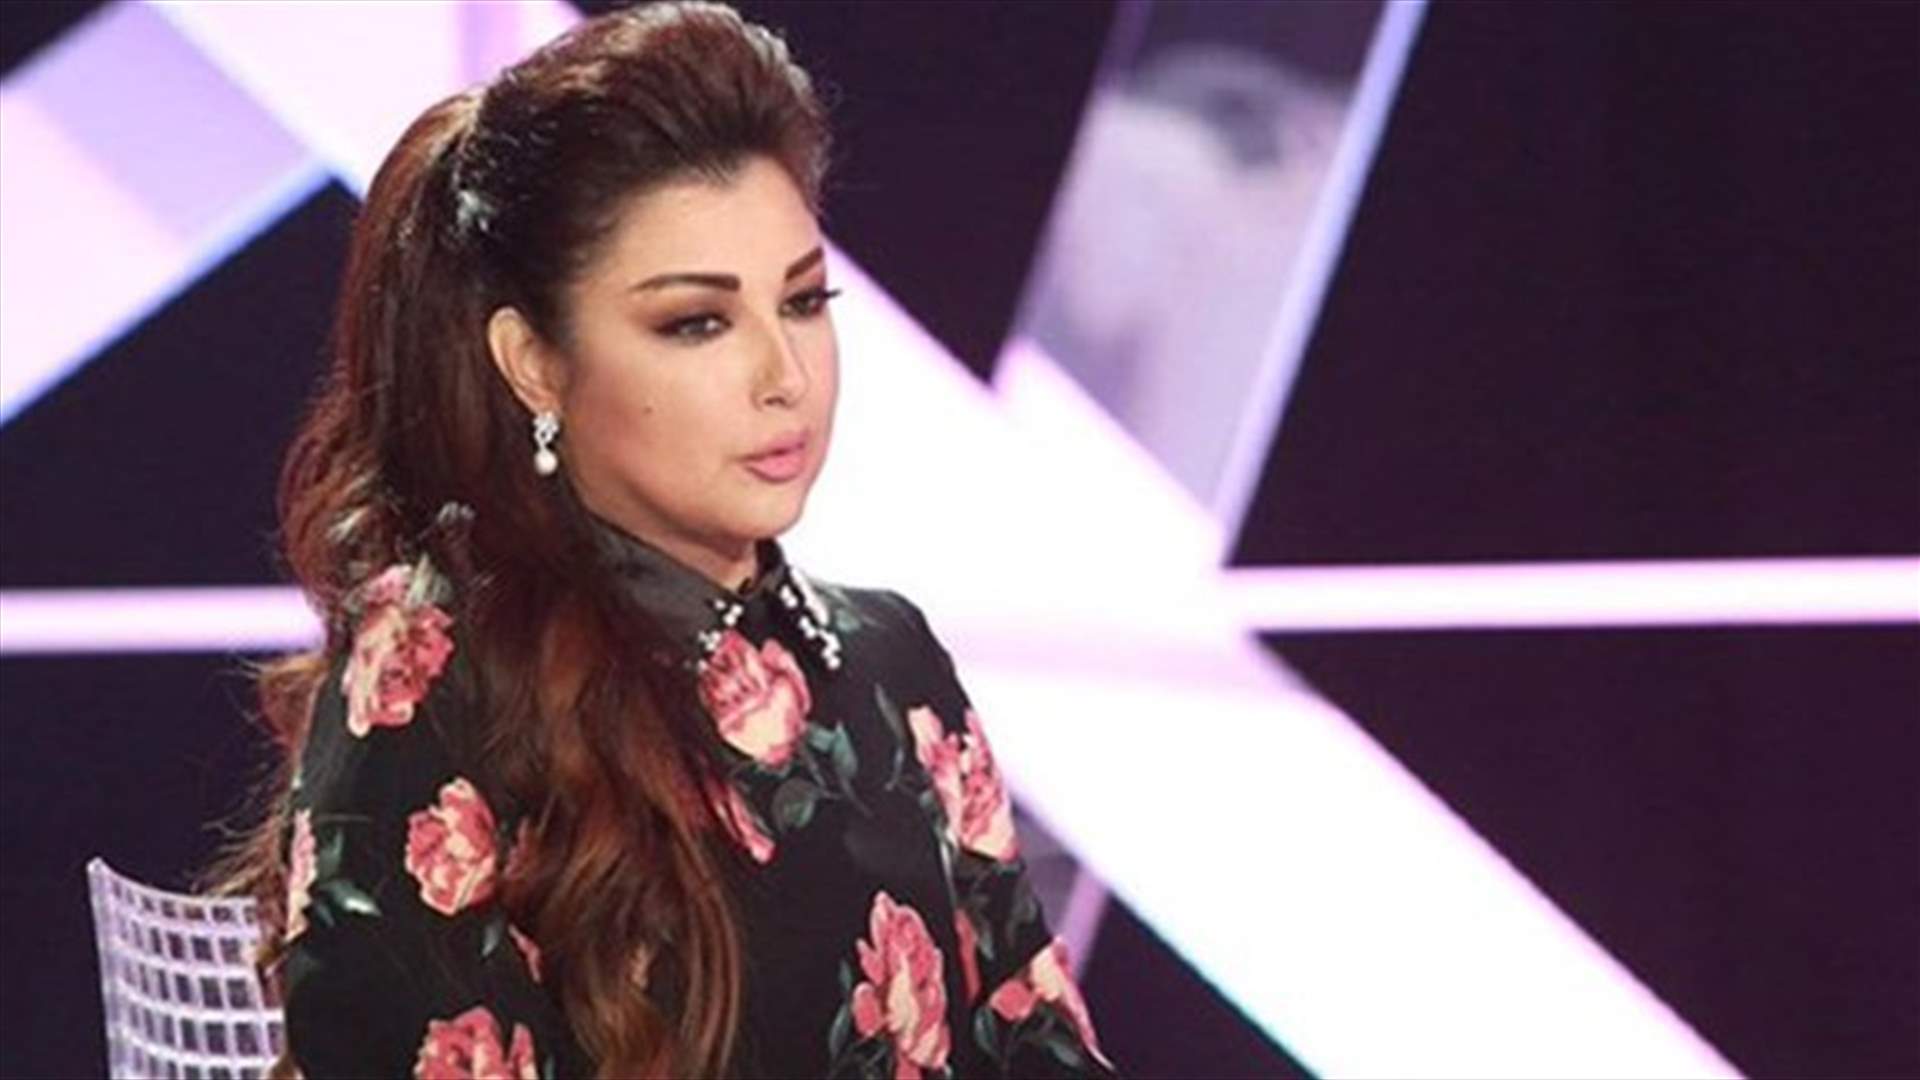 Arrest warrant issued against TV host Maria Maalouf